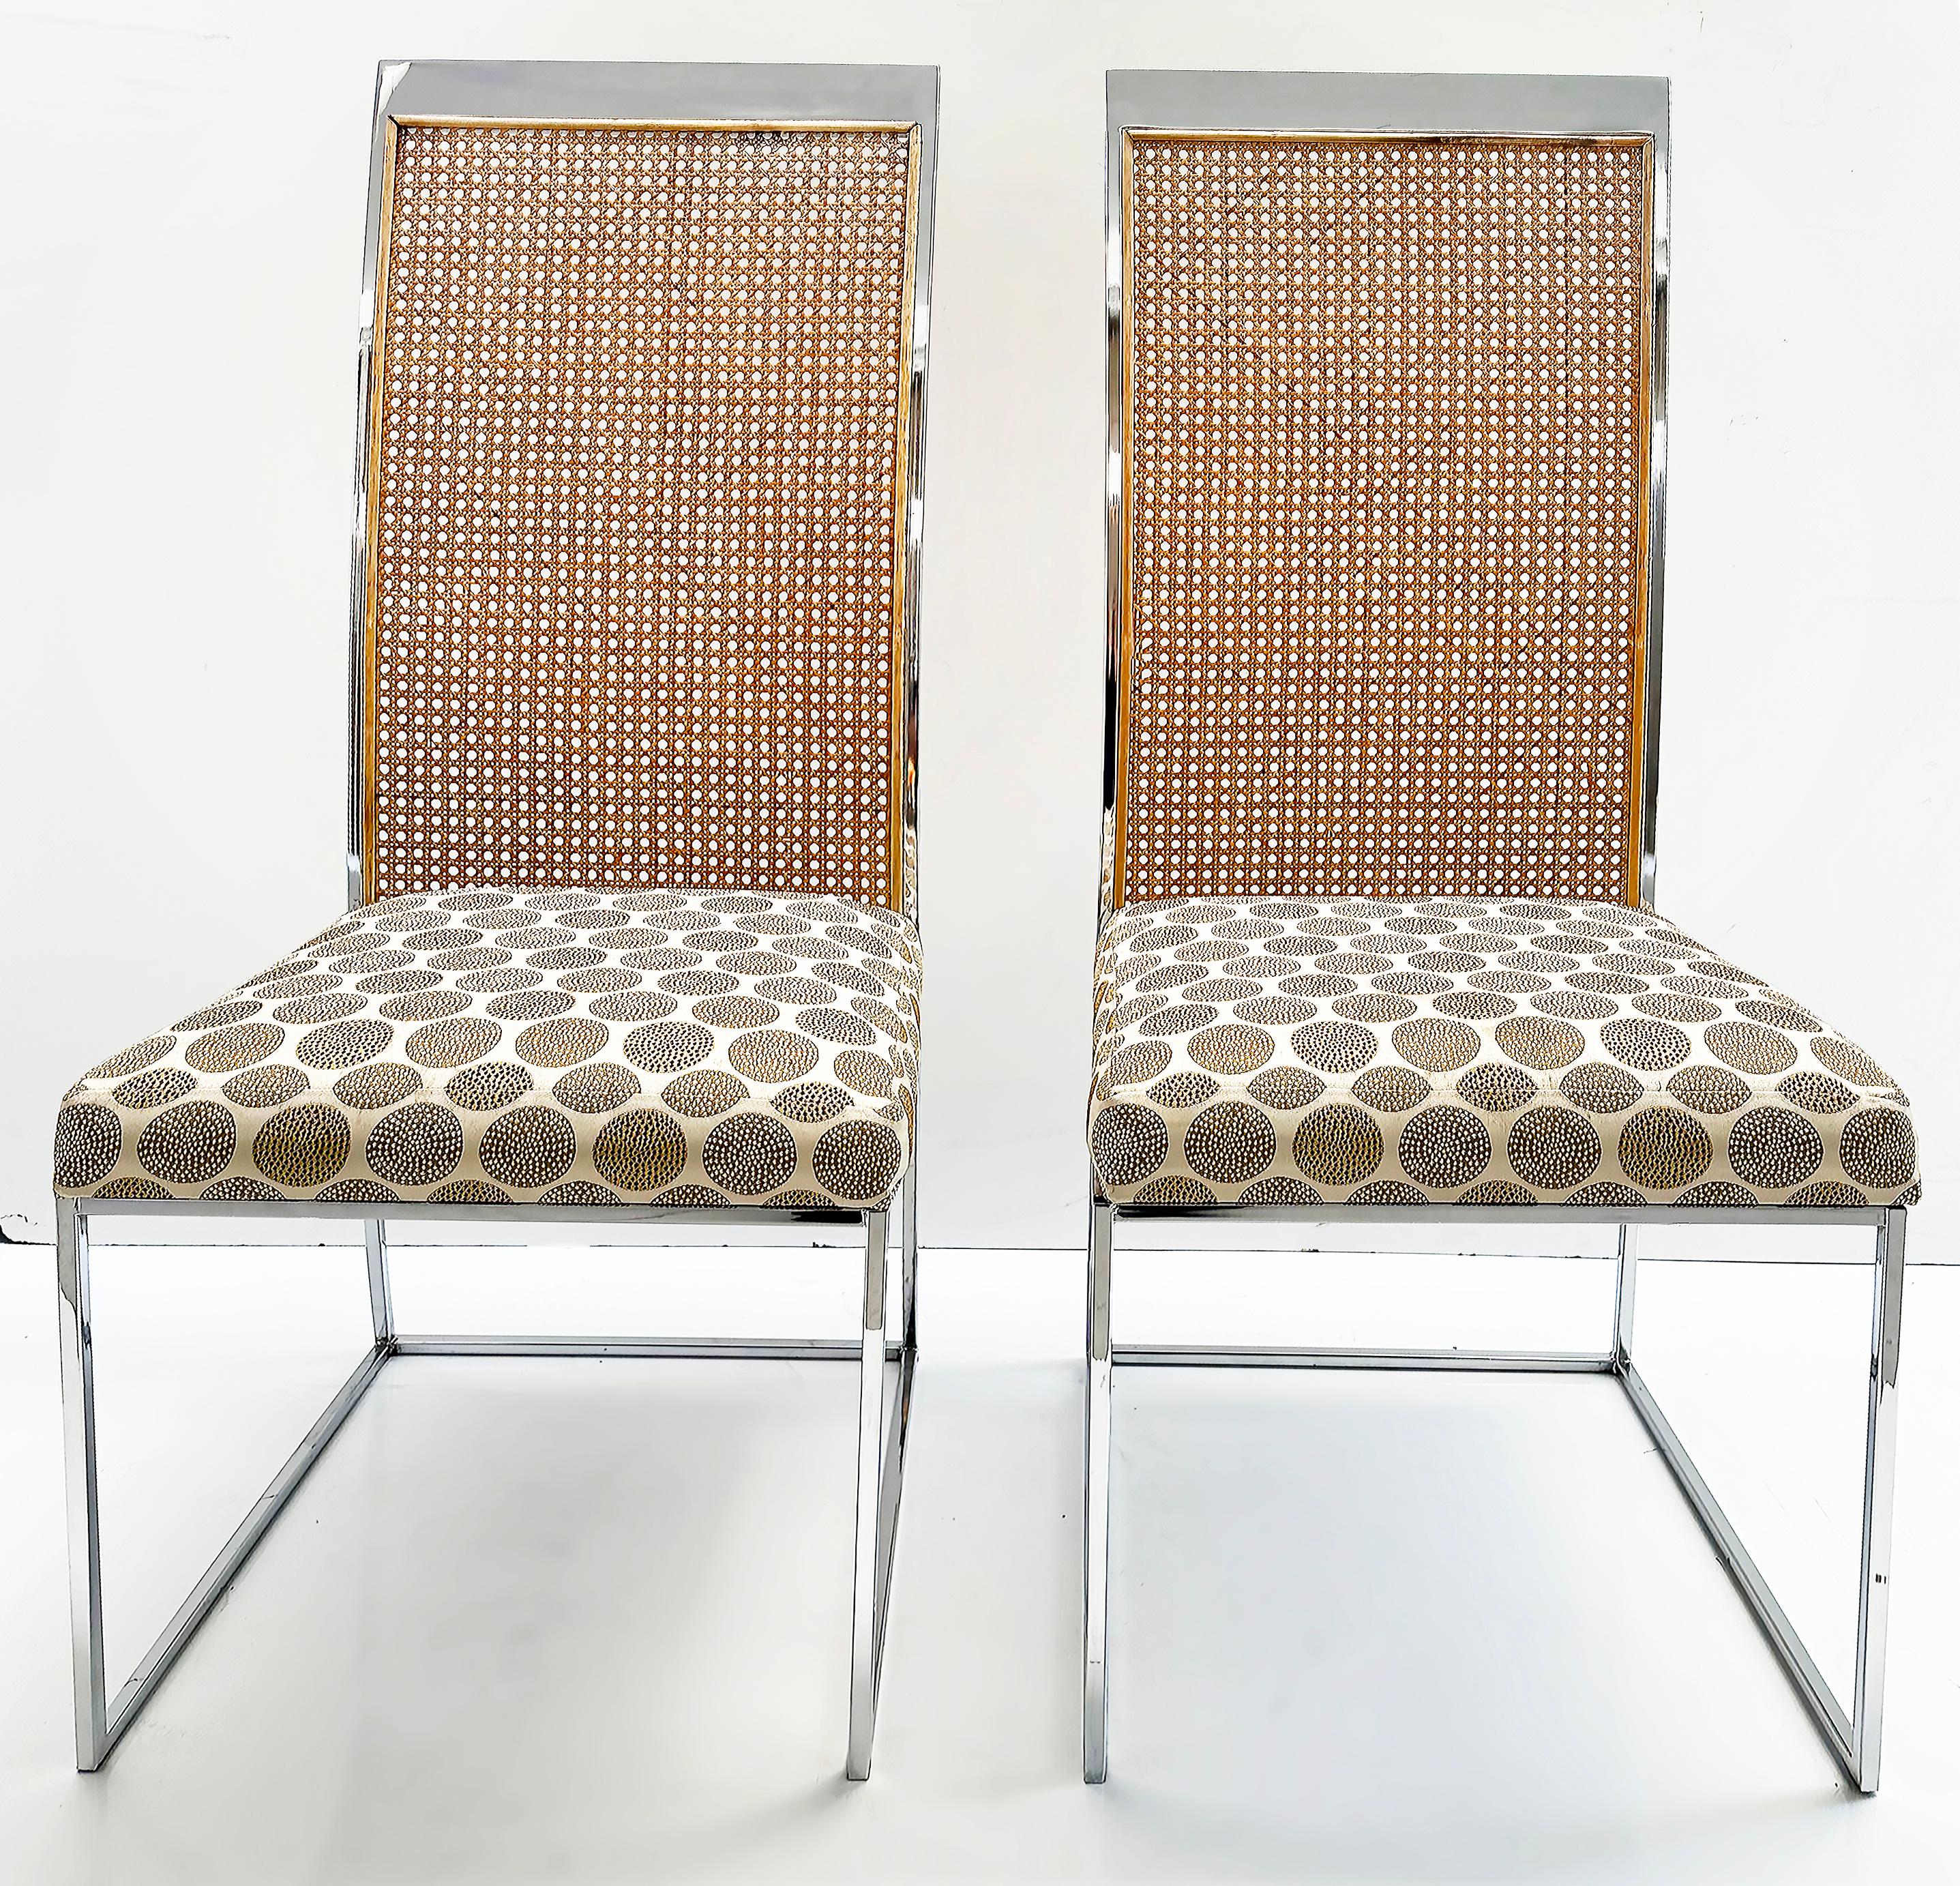  Milo Baughman Thayer Coggin Dining Chairs in Chrome and Cane -Set of 4

Offered for sale is a set of 4 Milo Baughman for Thayer Coggin chrome dining side chairs with cane backs and upholstered seats.. These substantial chairs have high backs and